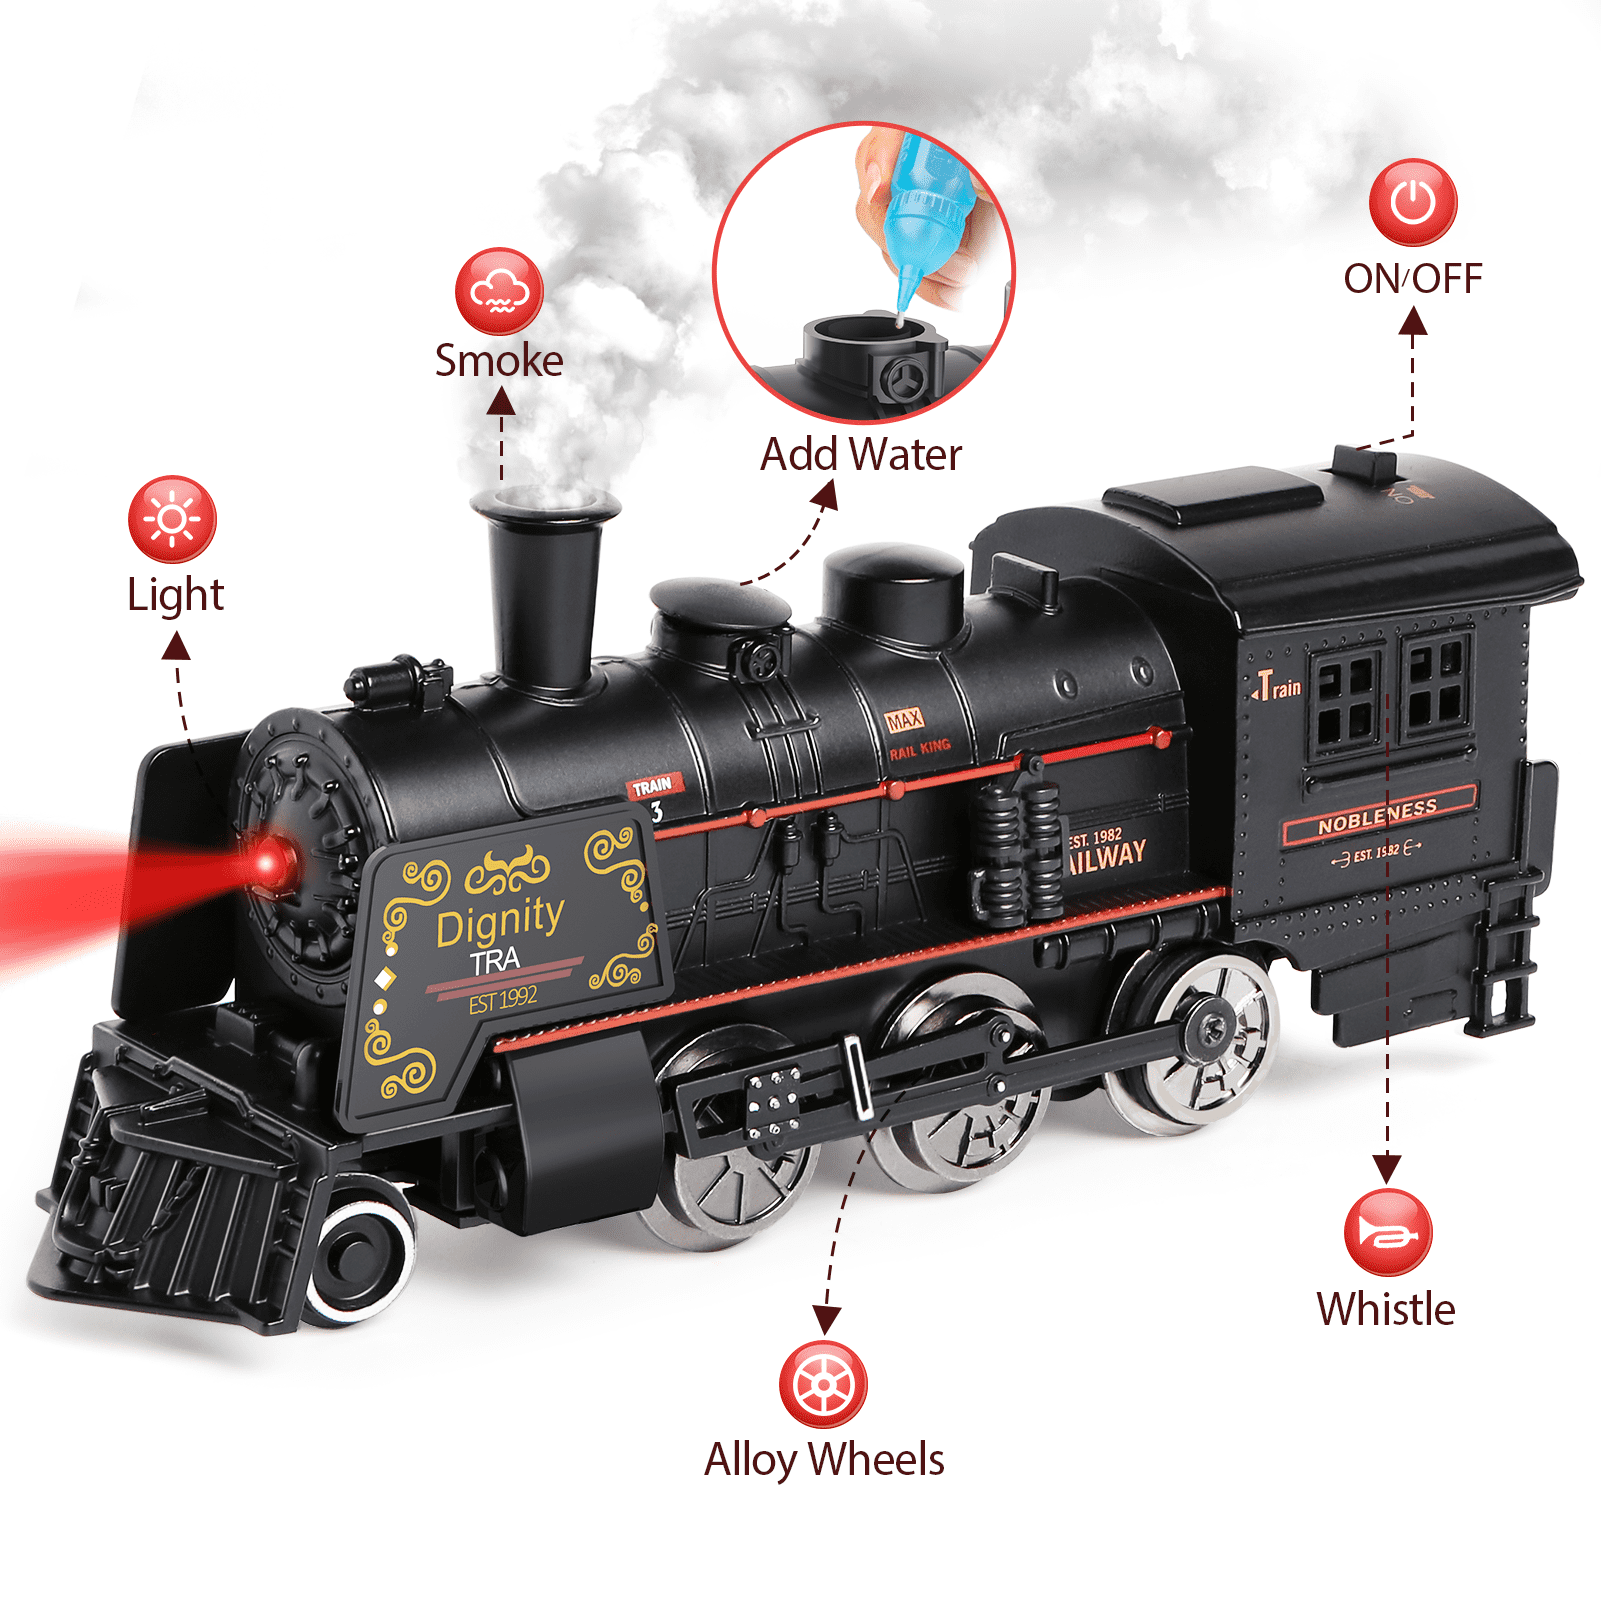  Hot Bee Model Train Set for Boys - Metal Electric Train Toys w/ Steam Locomotive, Glowing Passenger Carriages, Alloy Toy Train w/Rich  Tracks, Christmas Train Toys Gifts for 3 4 5 6